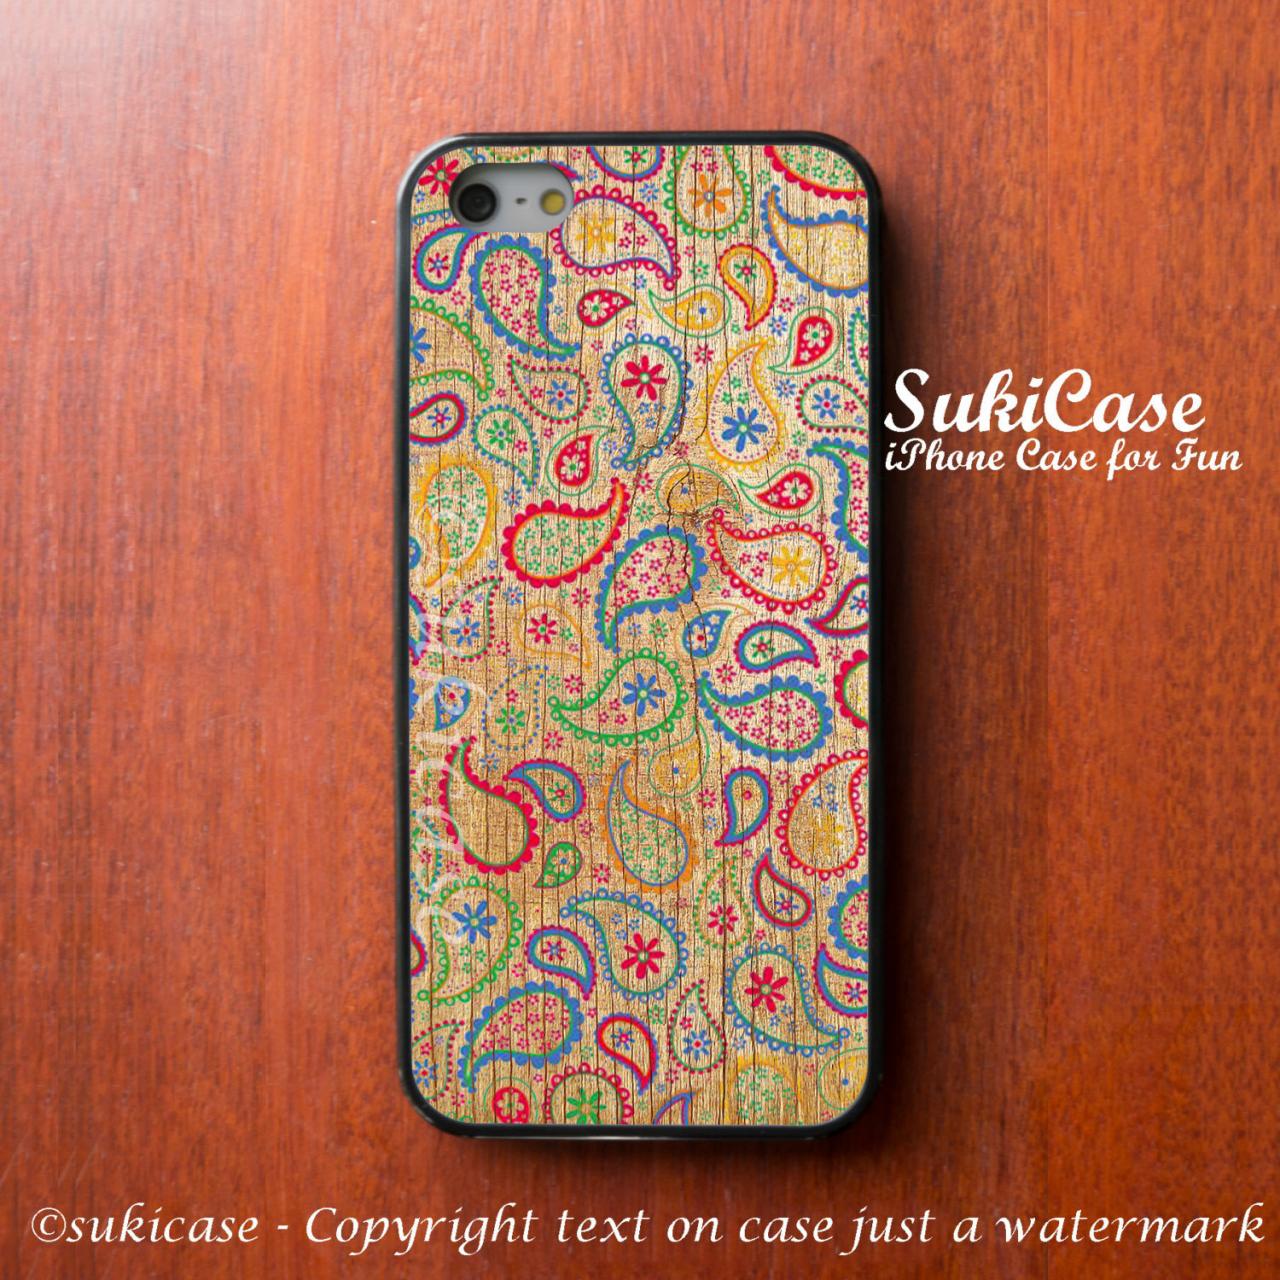 Wooden Paisley Iphone 5s Case Vintage Wood Colorful Iphone 4 Cases Iphone 5 Case Iphone Case Samsung Galaxy S3 S4 Cover Iphone 5c Iphone 4s